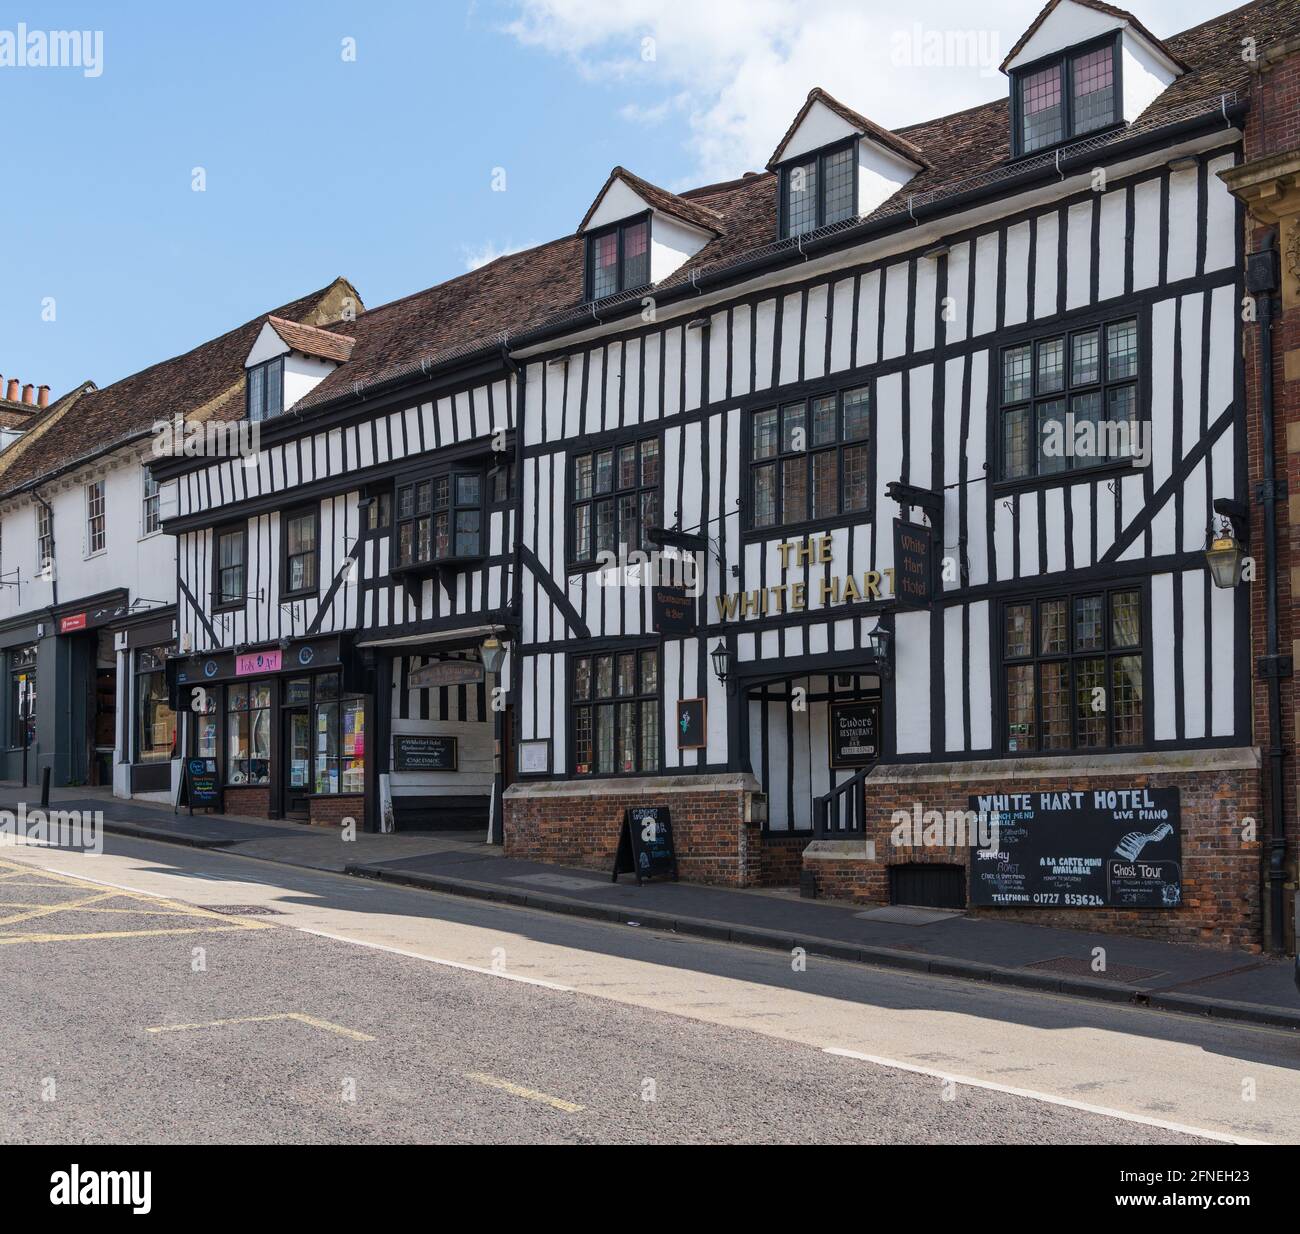 The White Hart Hotel, a timbered old coaching inn situated on Holywell Hill, St. Albans, Hertfordshire, England, UK Stock Photo